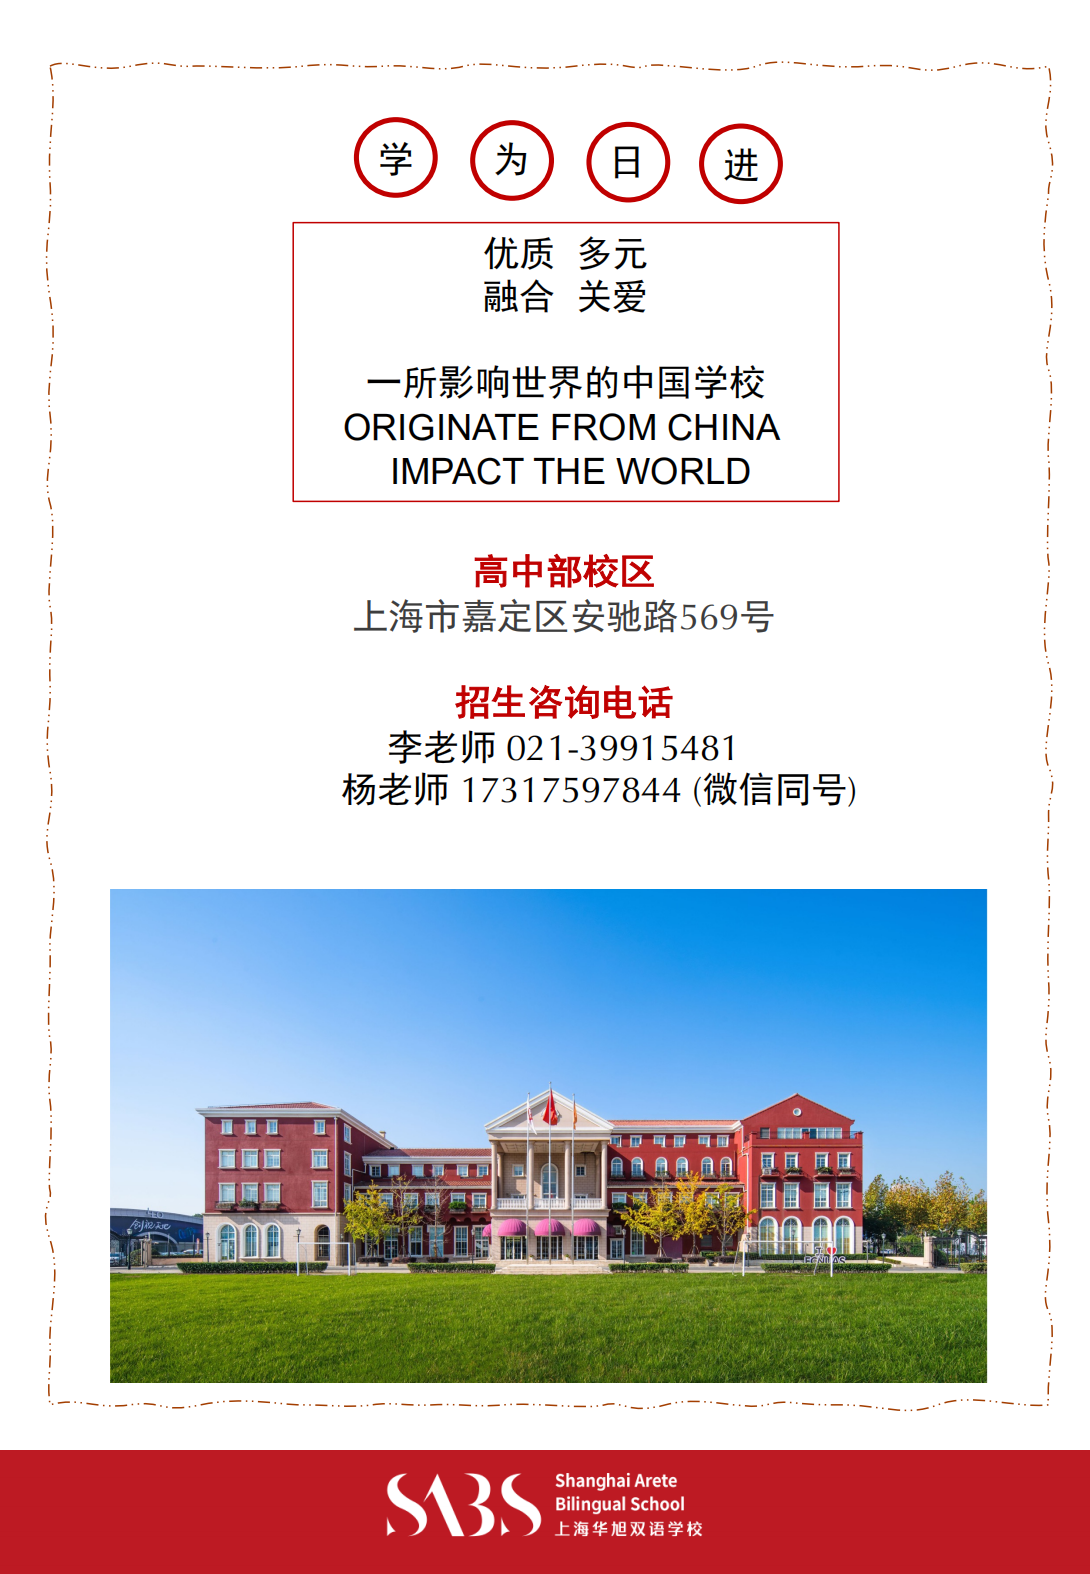 HS 4th Issue Newsletter pptx（Chinese）_21.png